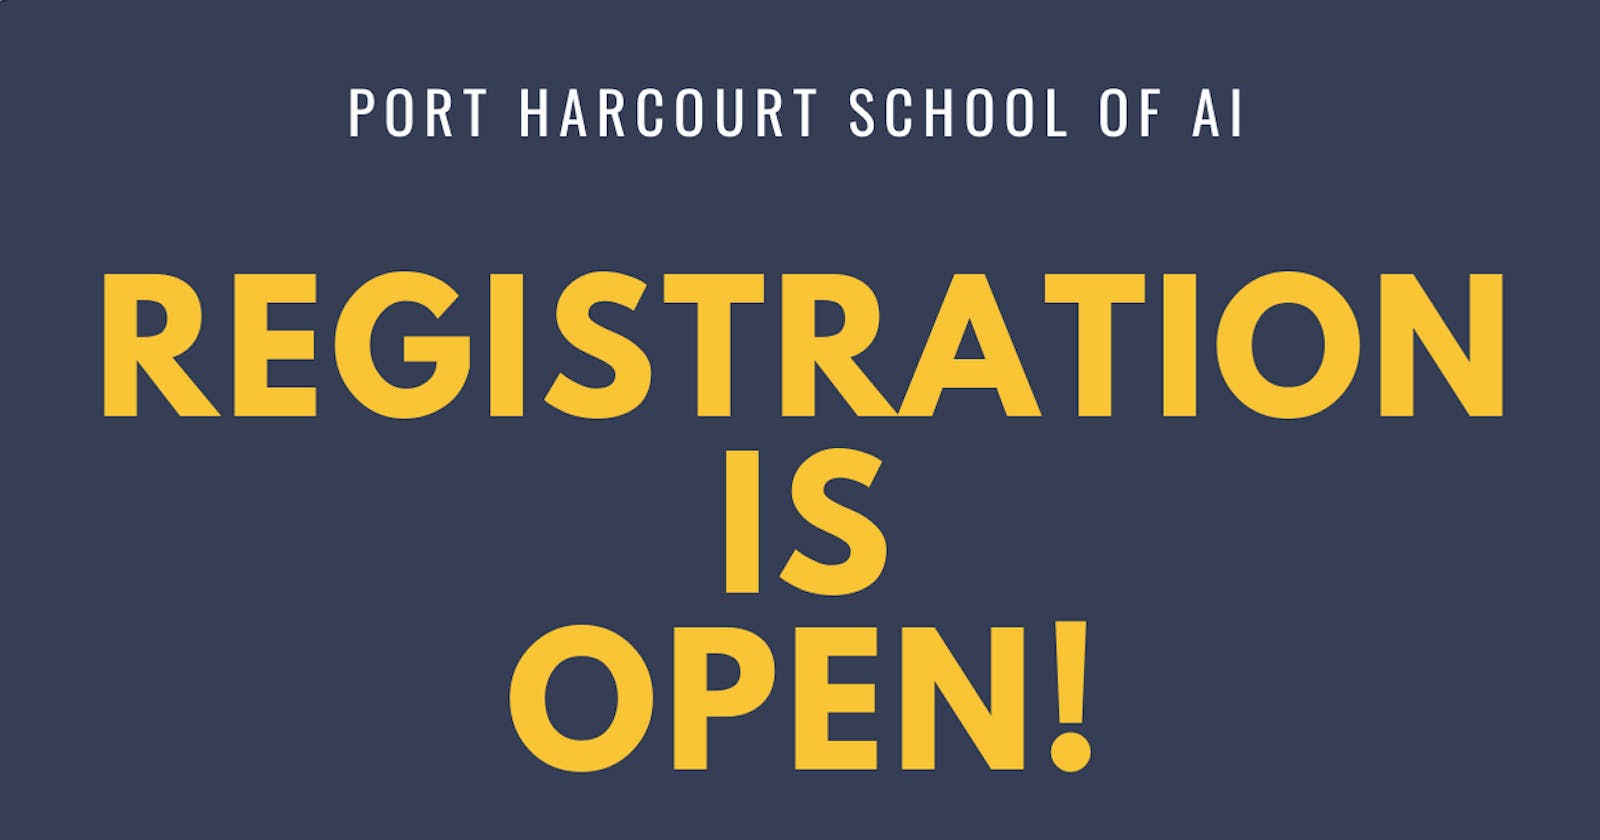 Registration For Port Harcourt School of AI's Machine Learning Cohort 2020 is Open!!!